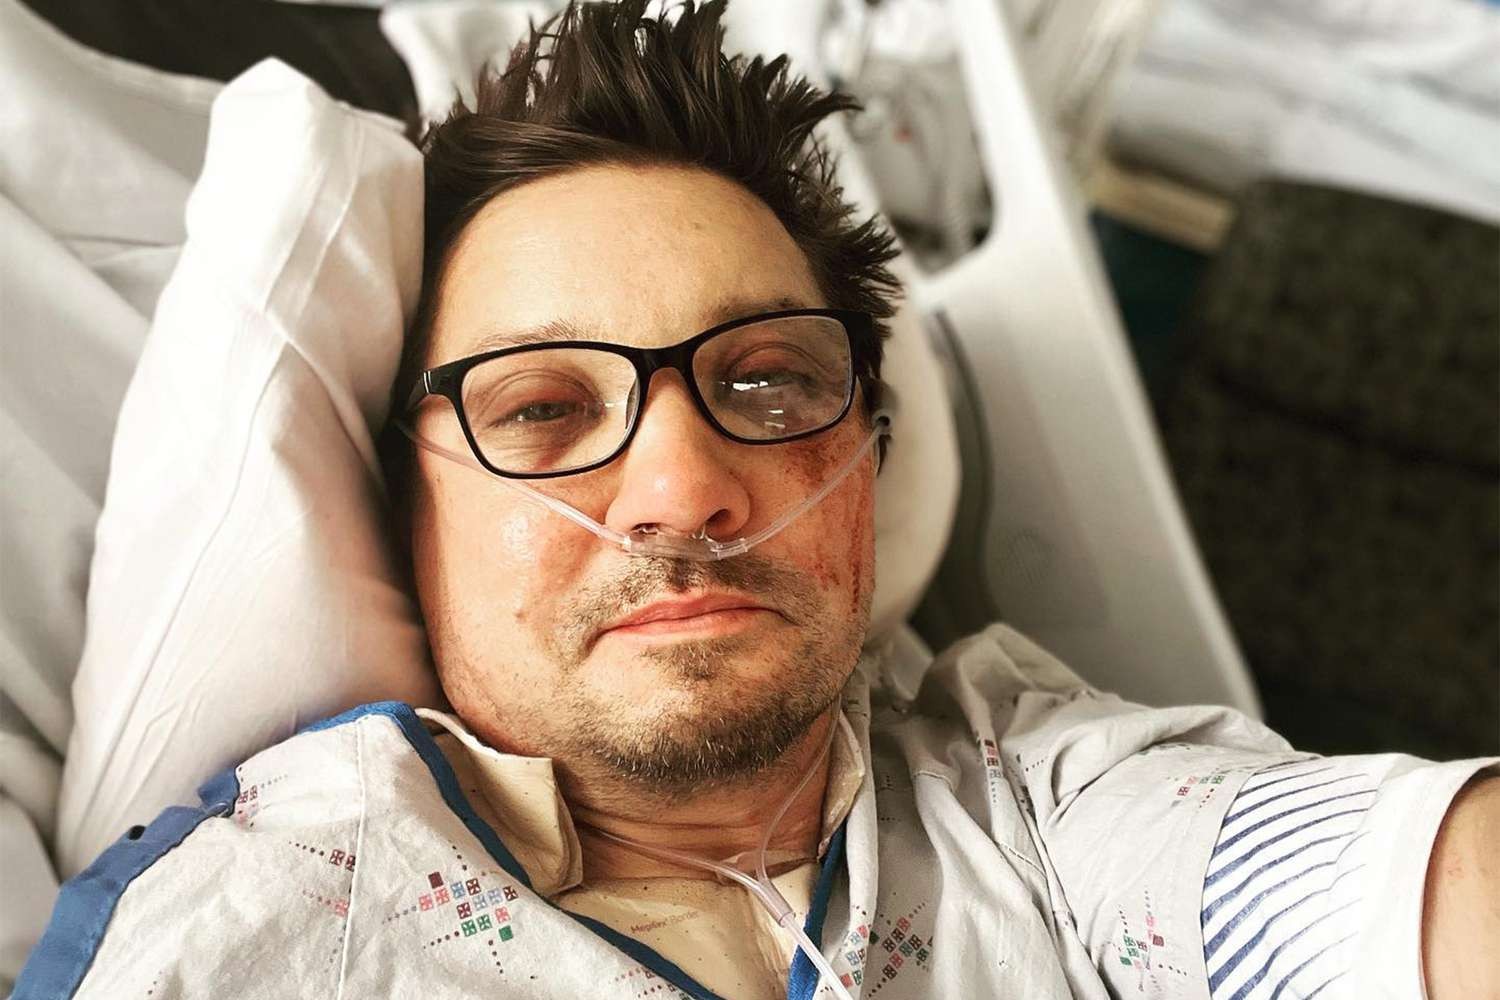 Jeremy Renner after his accident